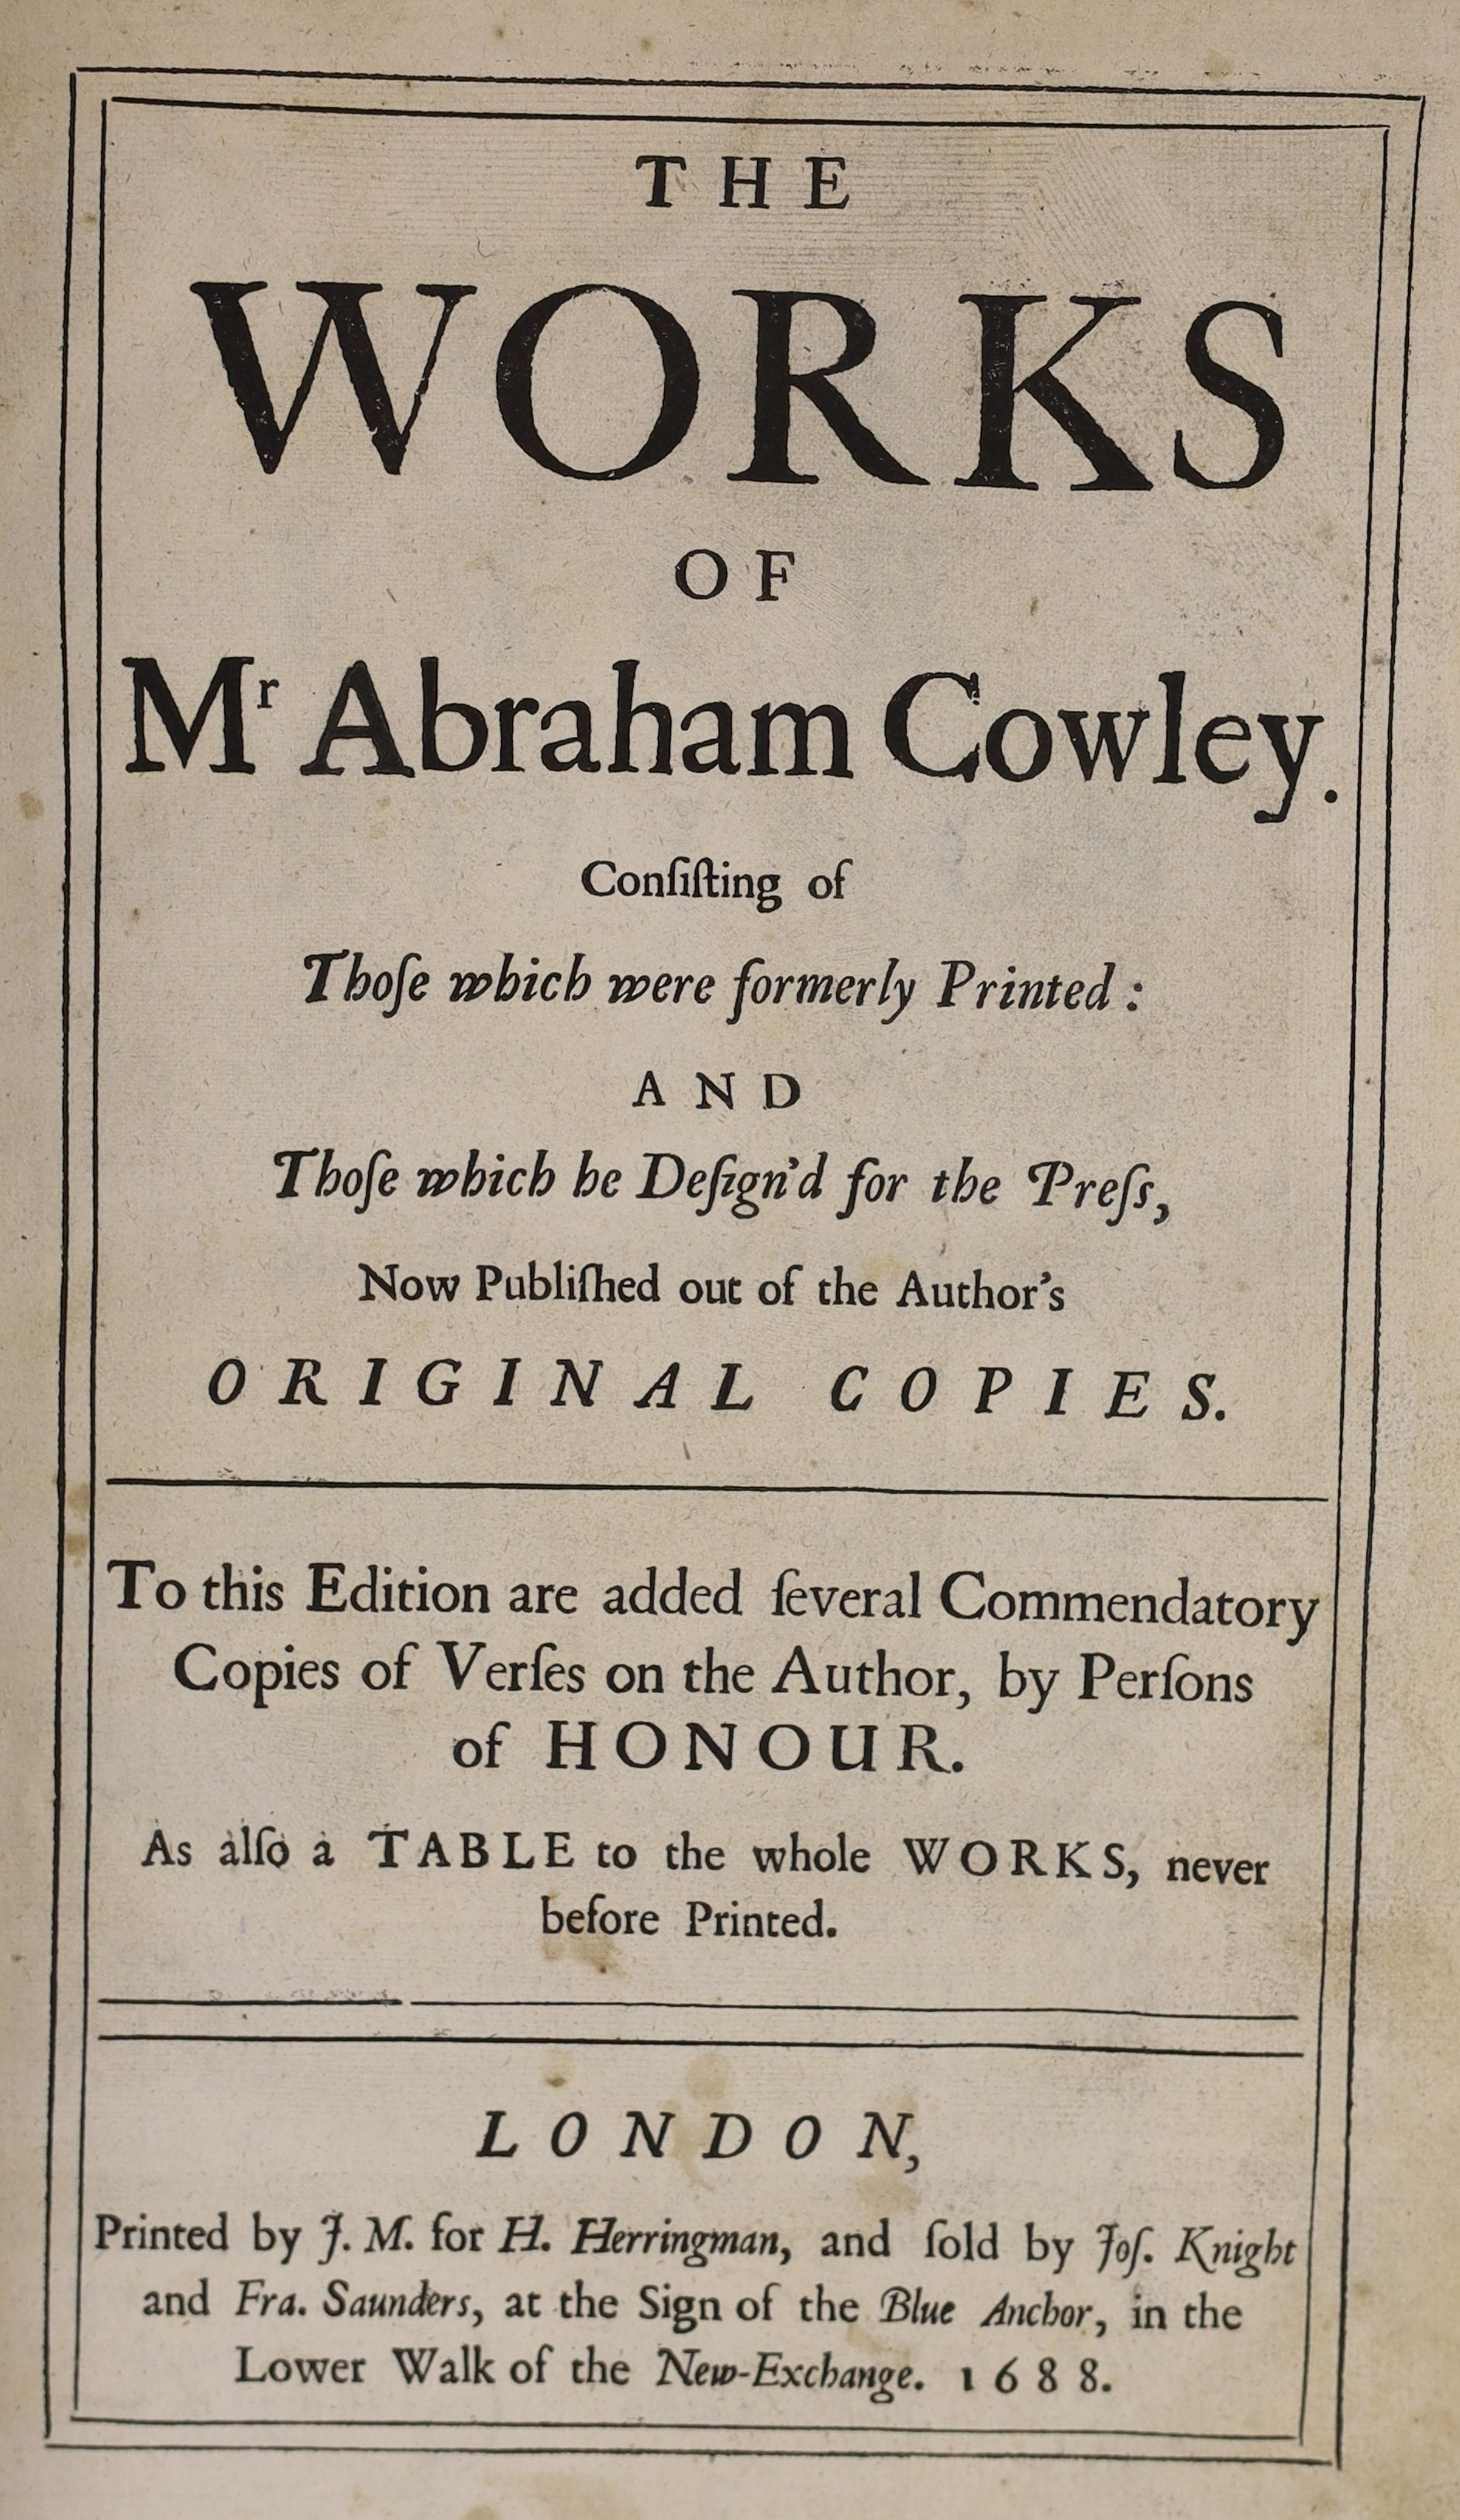 Cowley, Abraham - The Works, 2 parts in one vol., folio, modern crushed brown morocco, engraved portrait, H. Herringham, J. Knight and F. Saunders, London, 1688; the Second and Third Parts of the Works, engraved frontisp